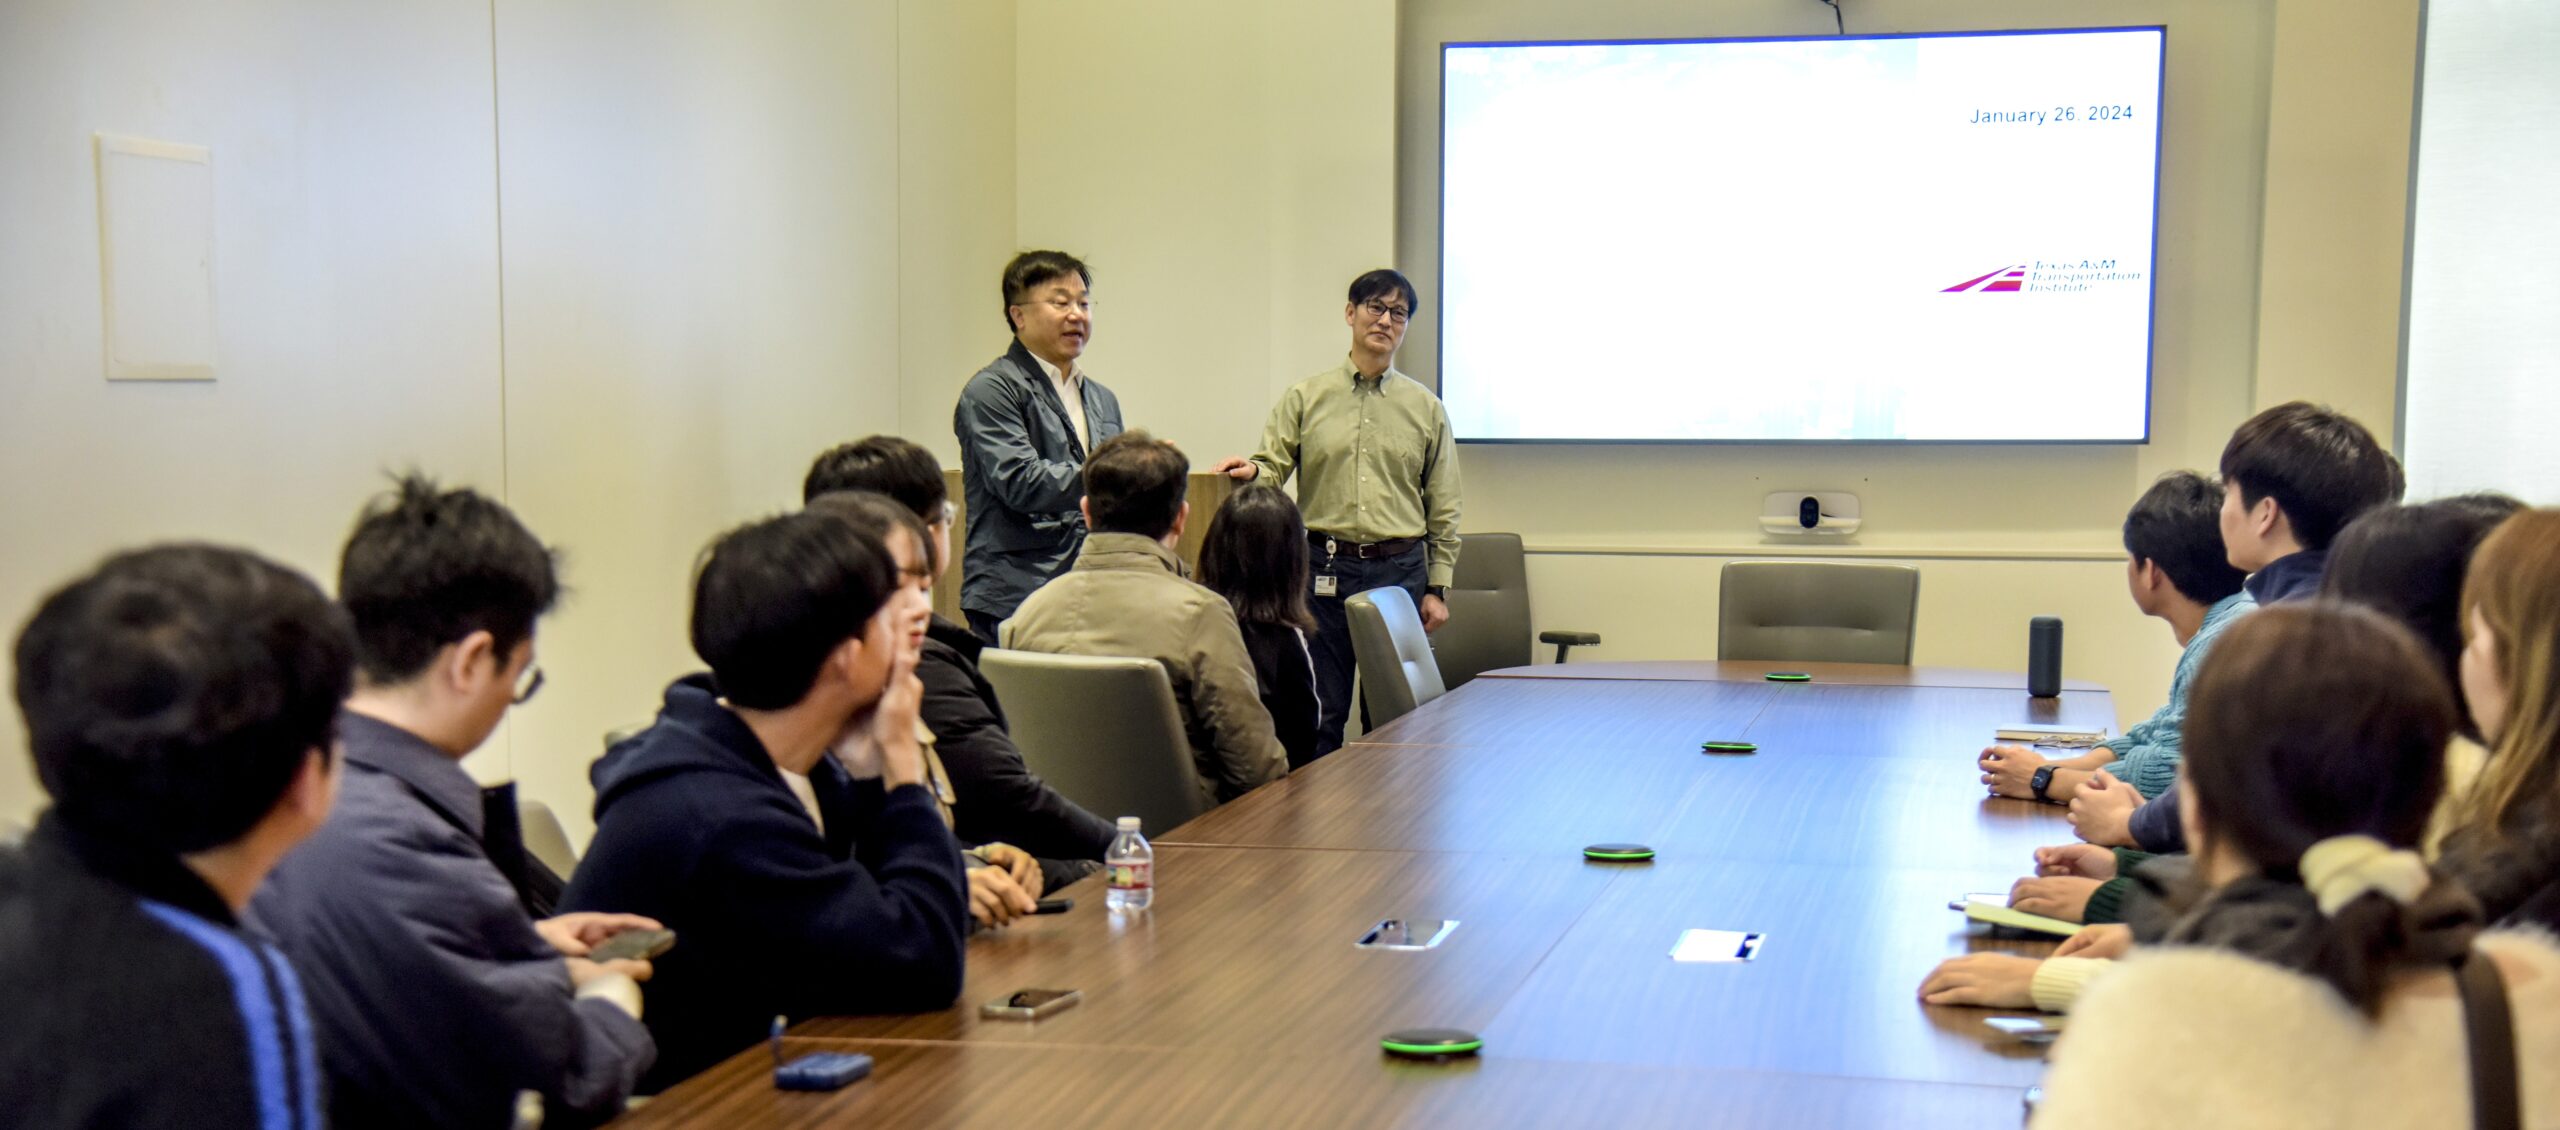 Visitors from the KAIST Program gather around a meeting table at the Texas A&M Transportation Institute headquarters building.